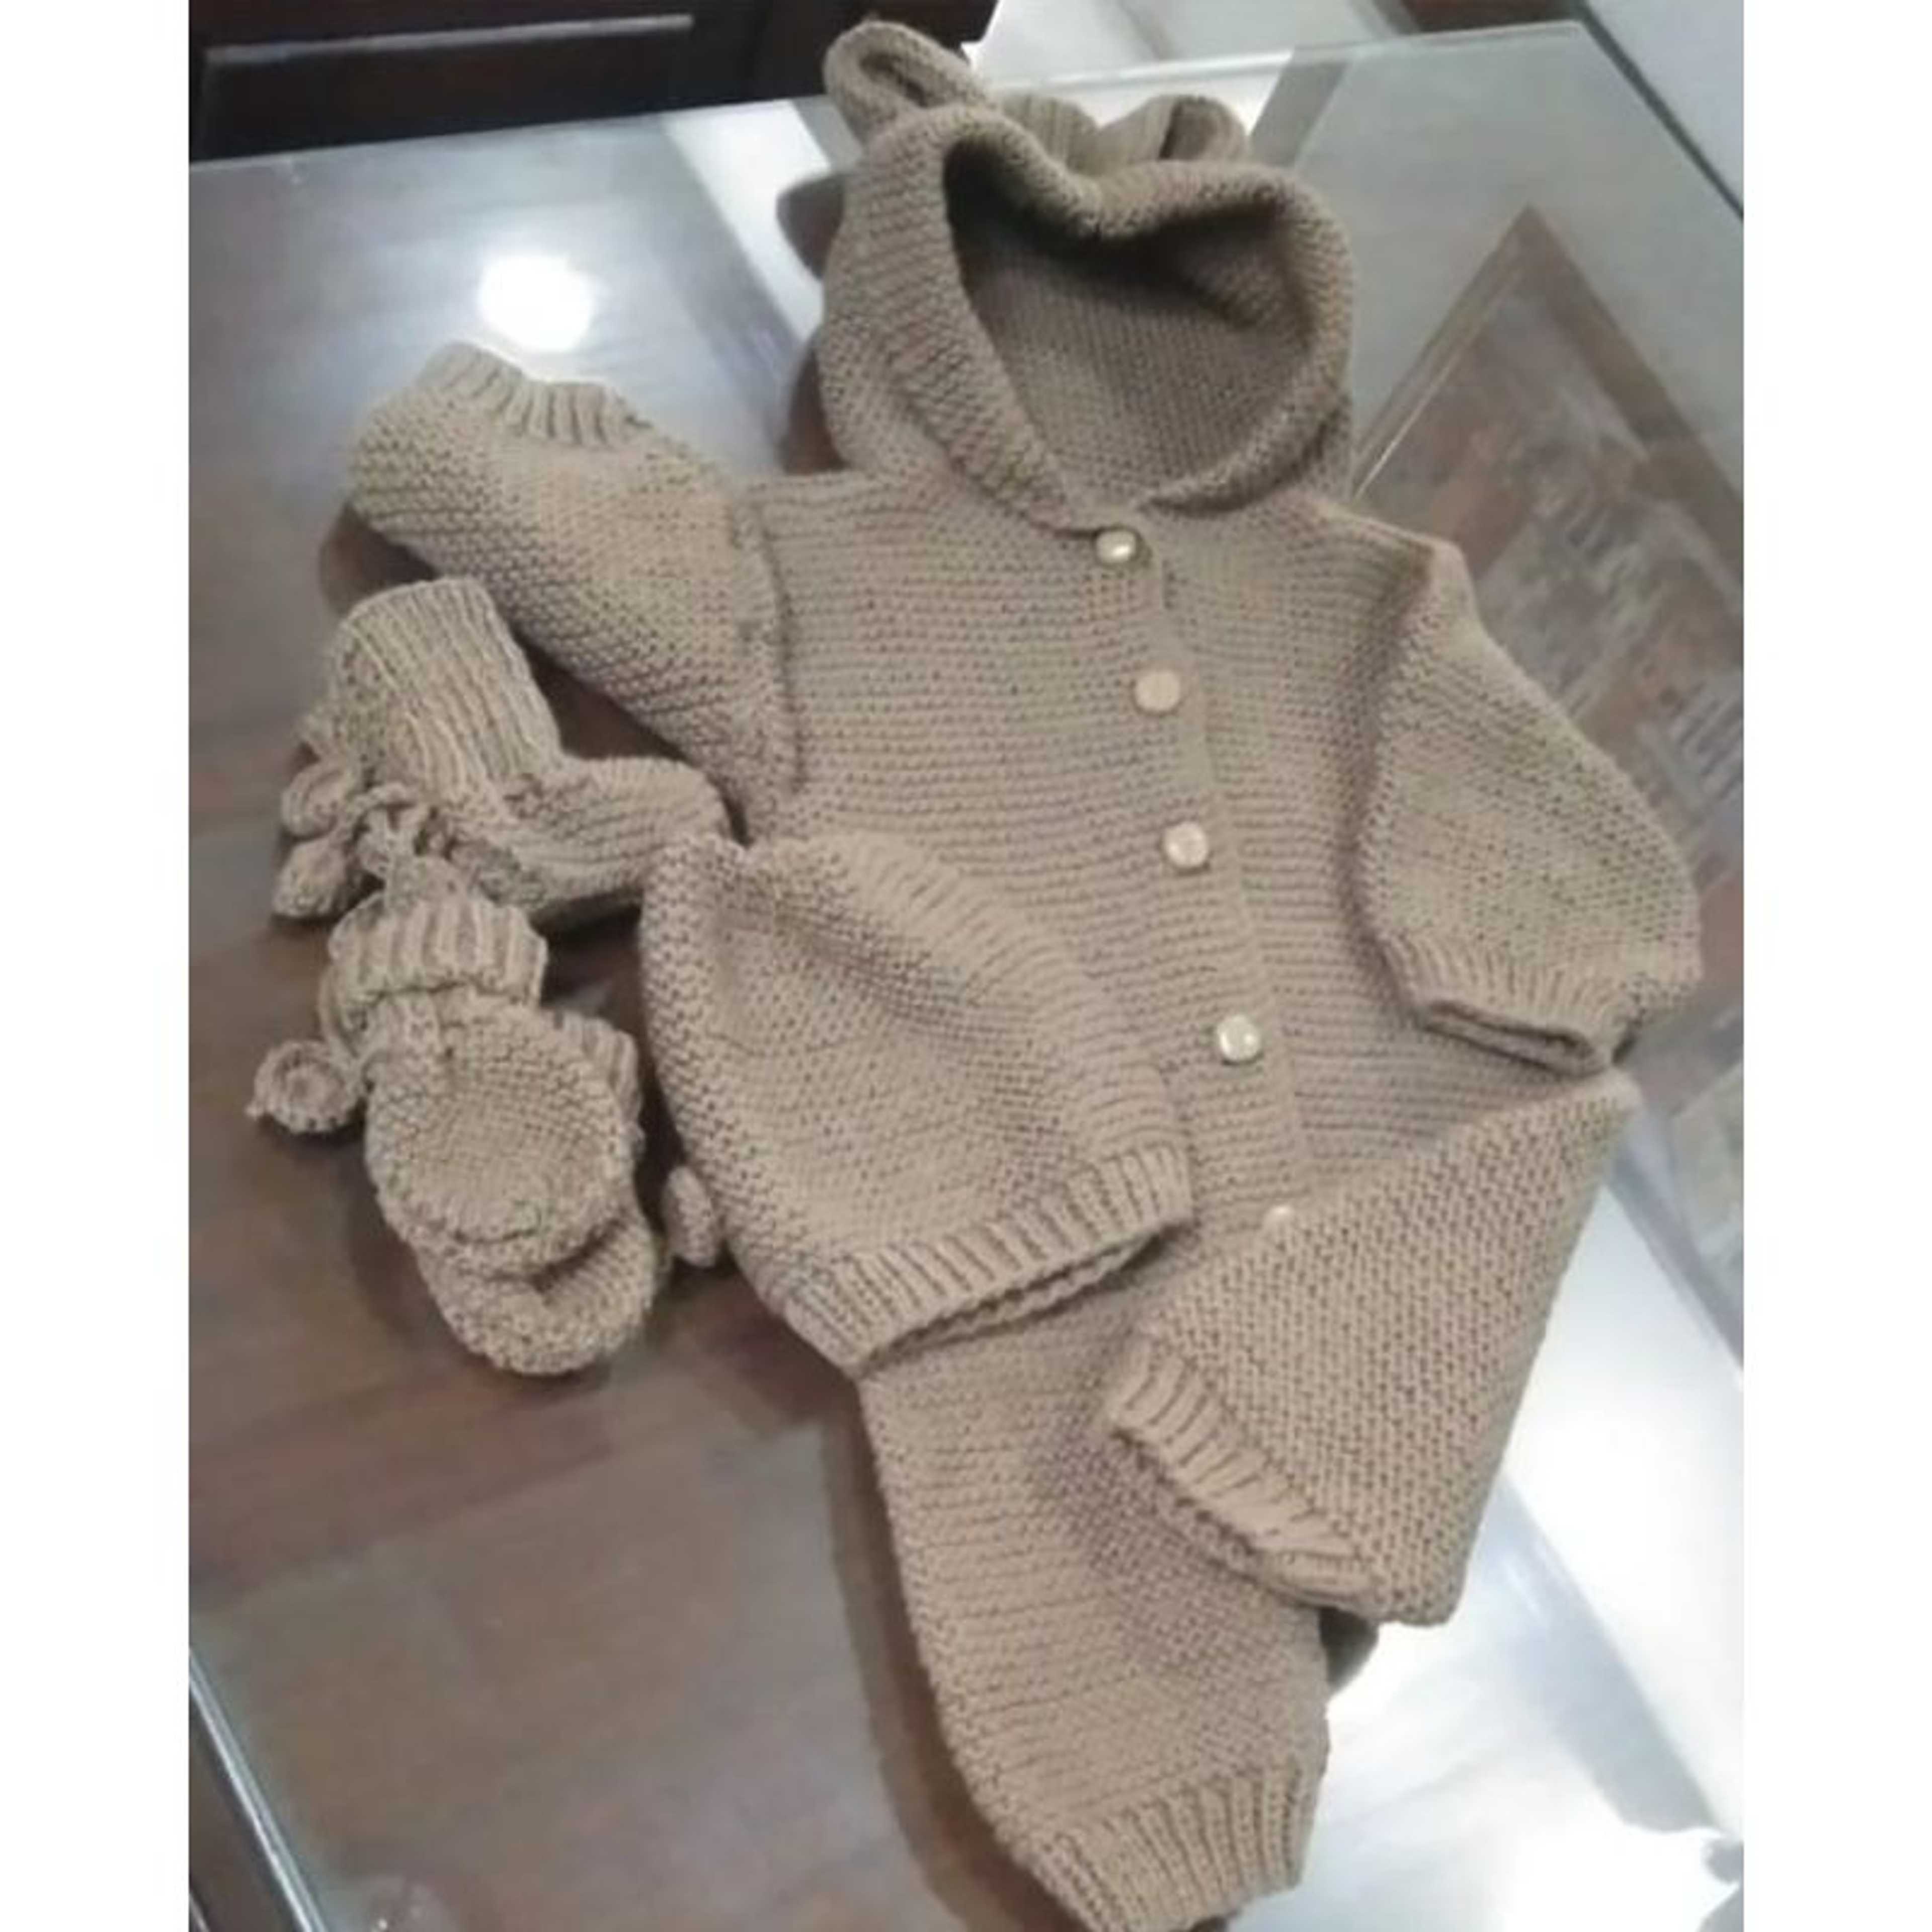 Complete Romper Set Handmade - Brown Color (0 to 6 Months Size)